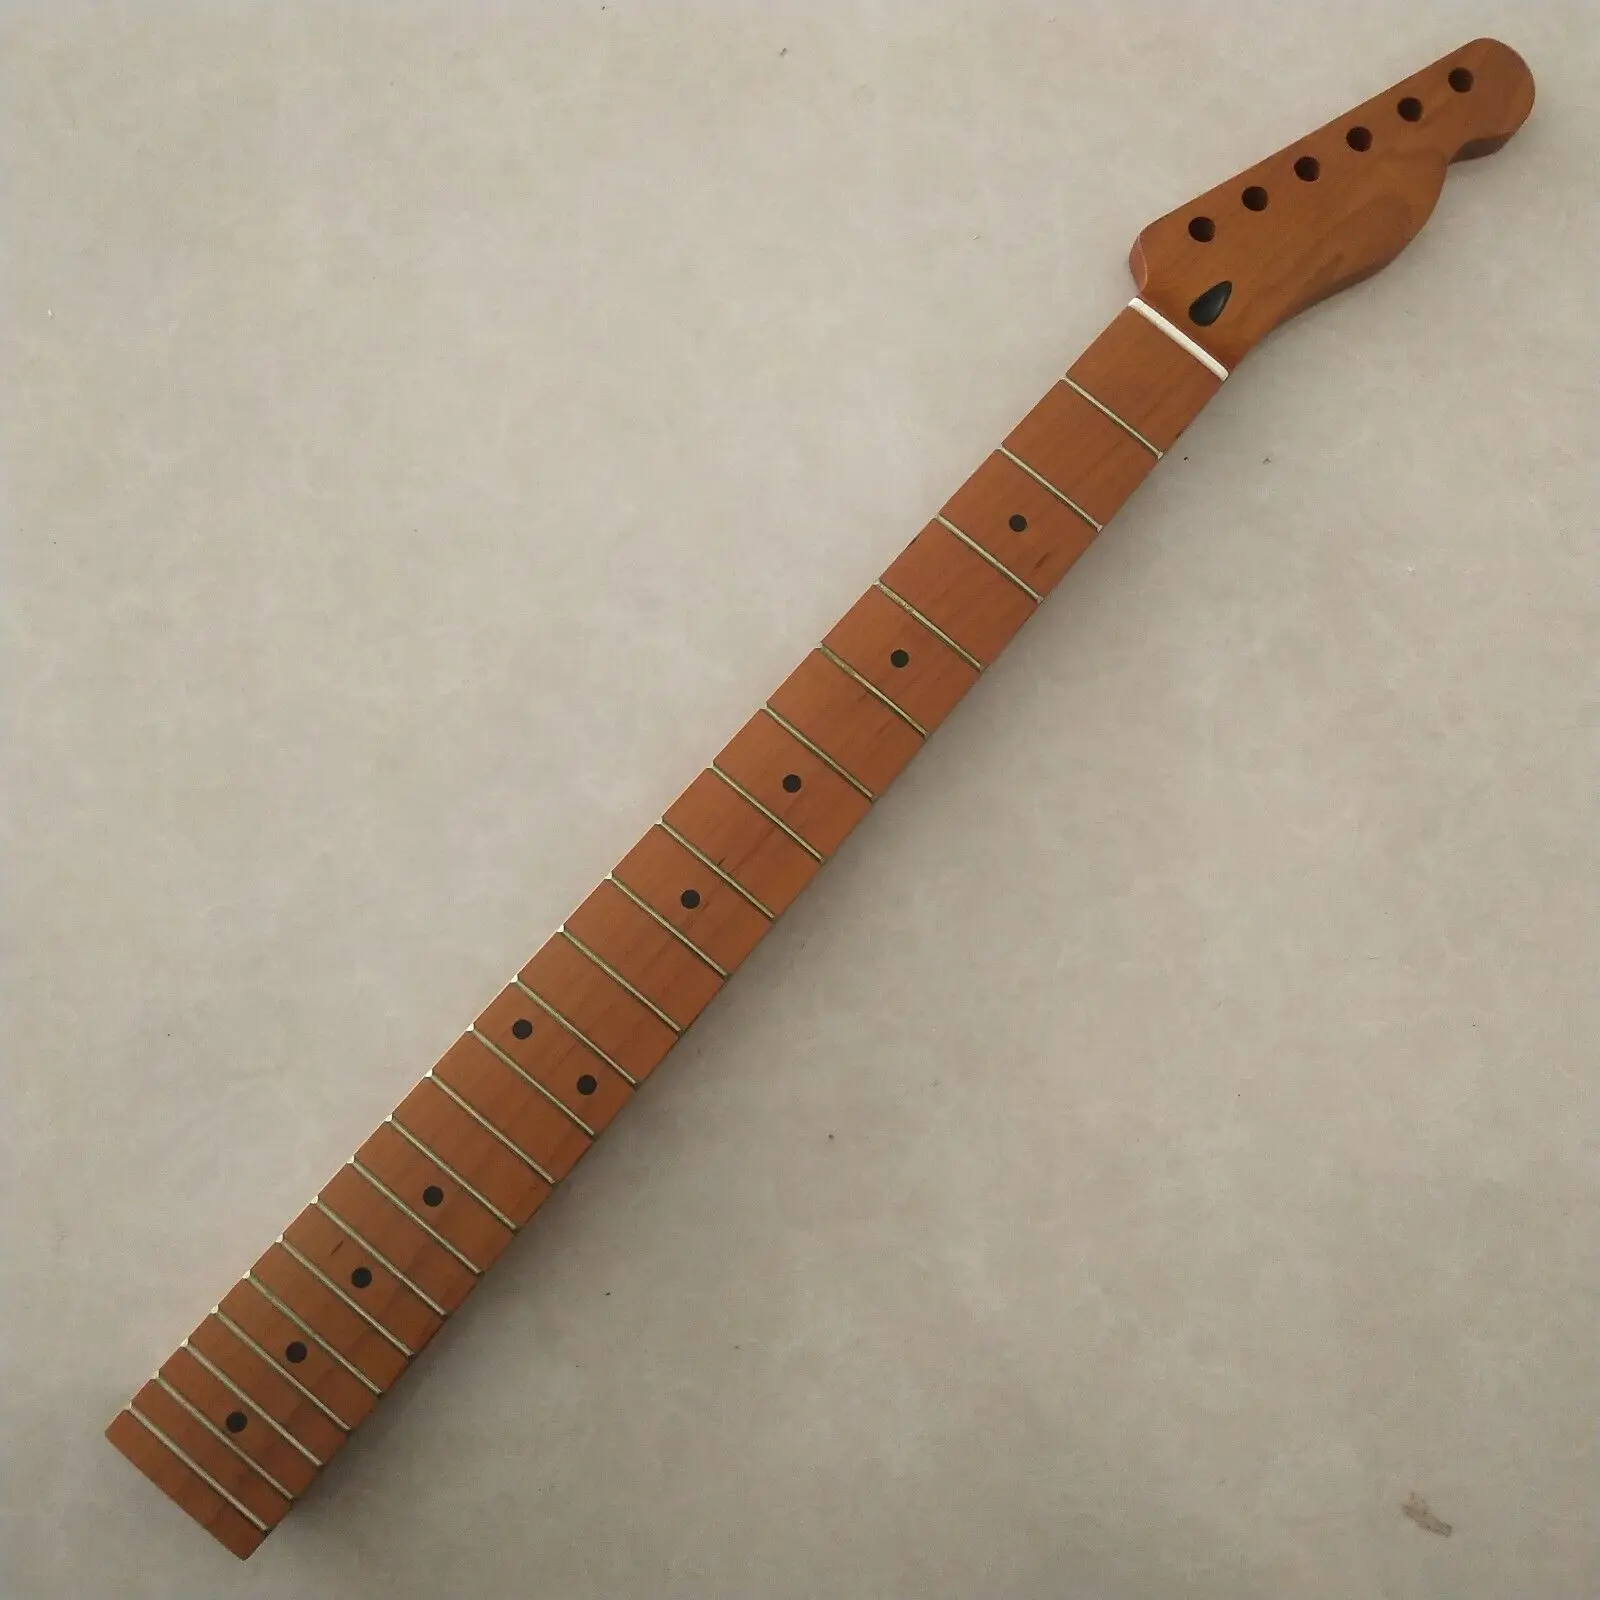 Roasted Maple TL Guitar Neck 22 Fret 25.5 Inch Maple Fingerboard Dot Inlay parts enlarge